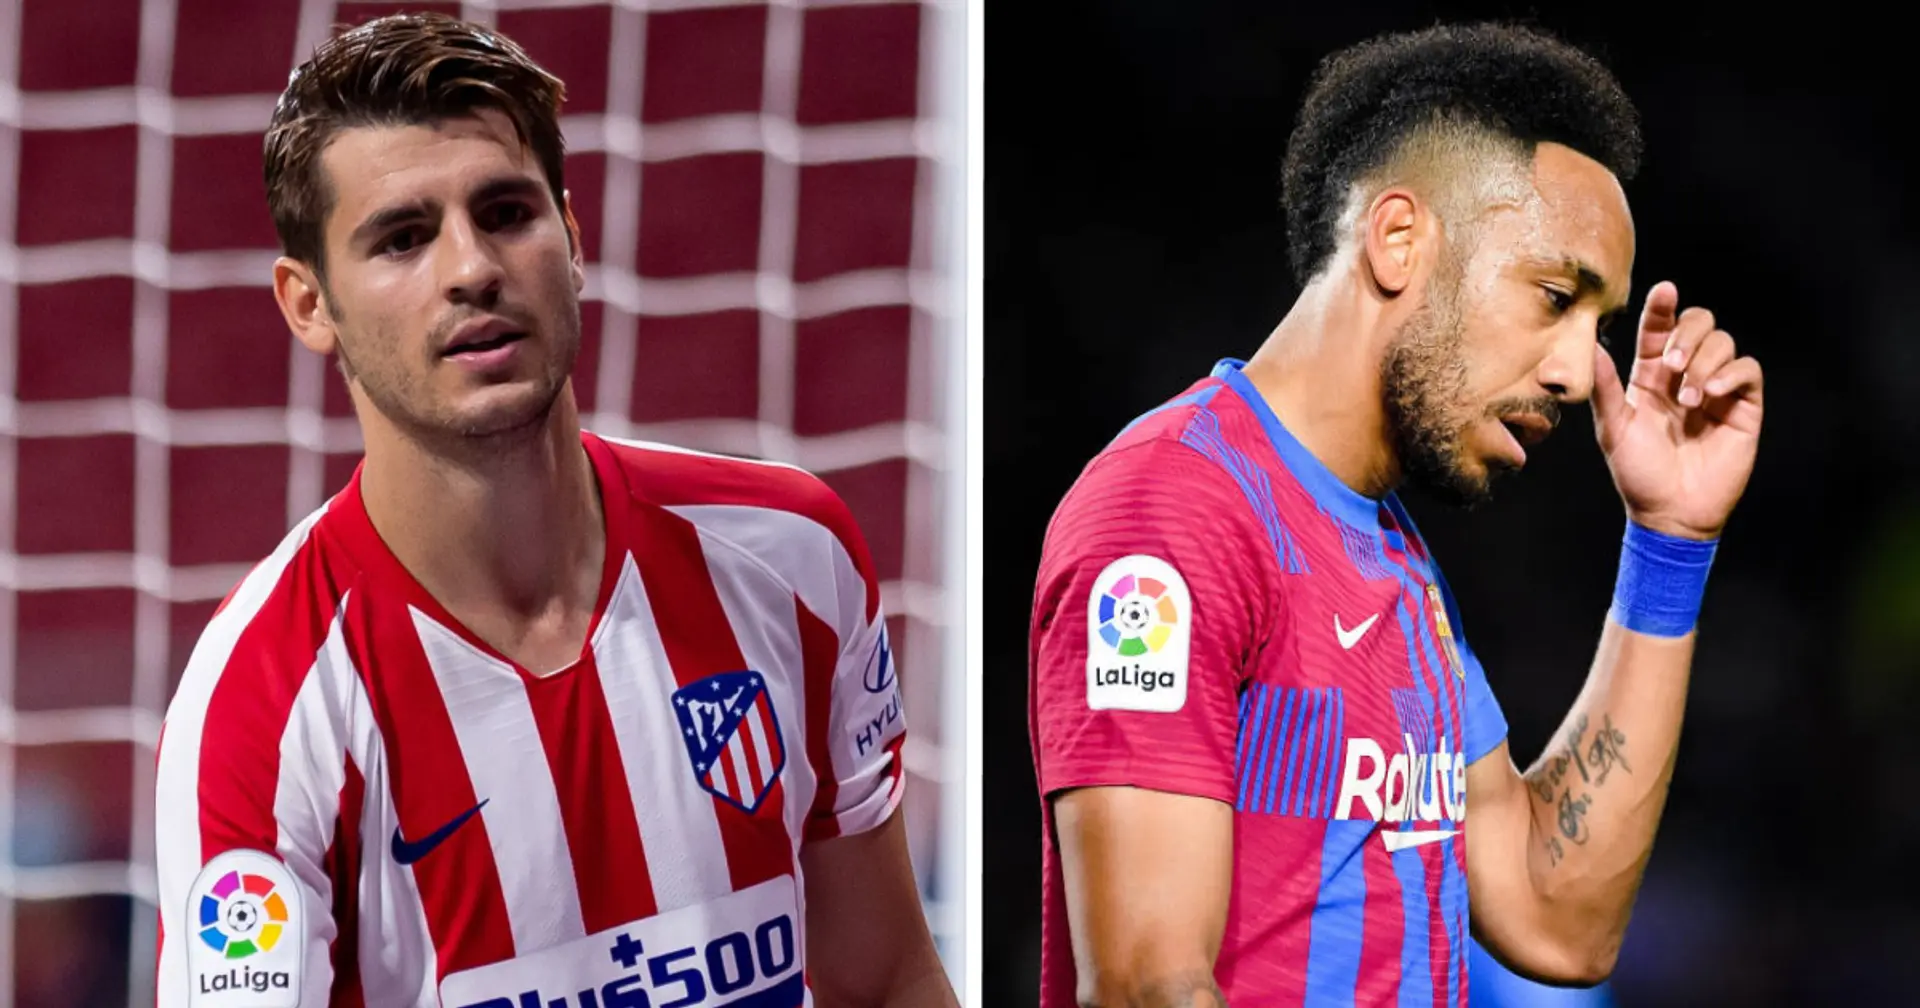 Morata named as likely option for Chelsea if Aubameyang deal falls through